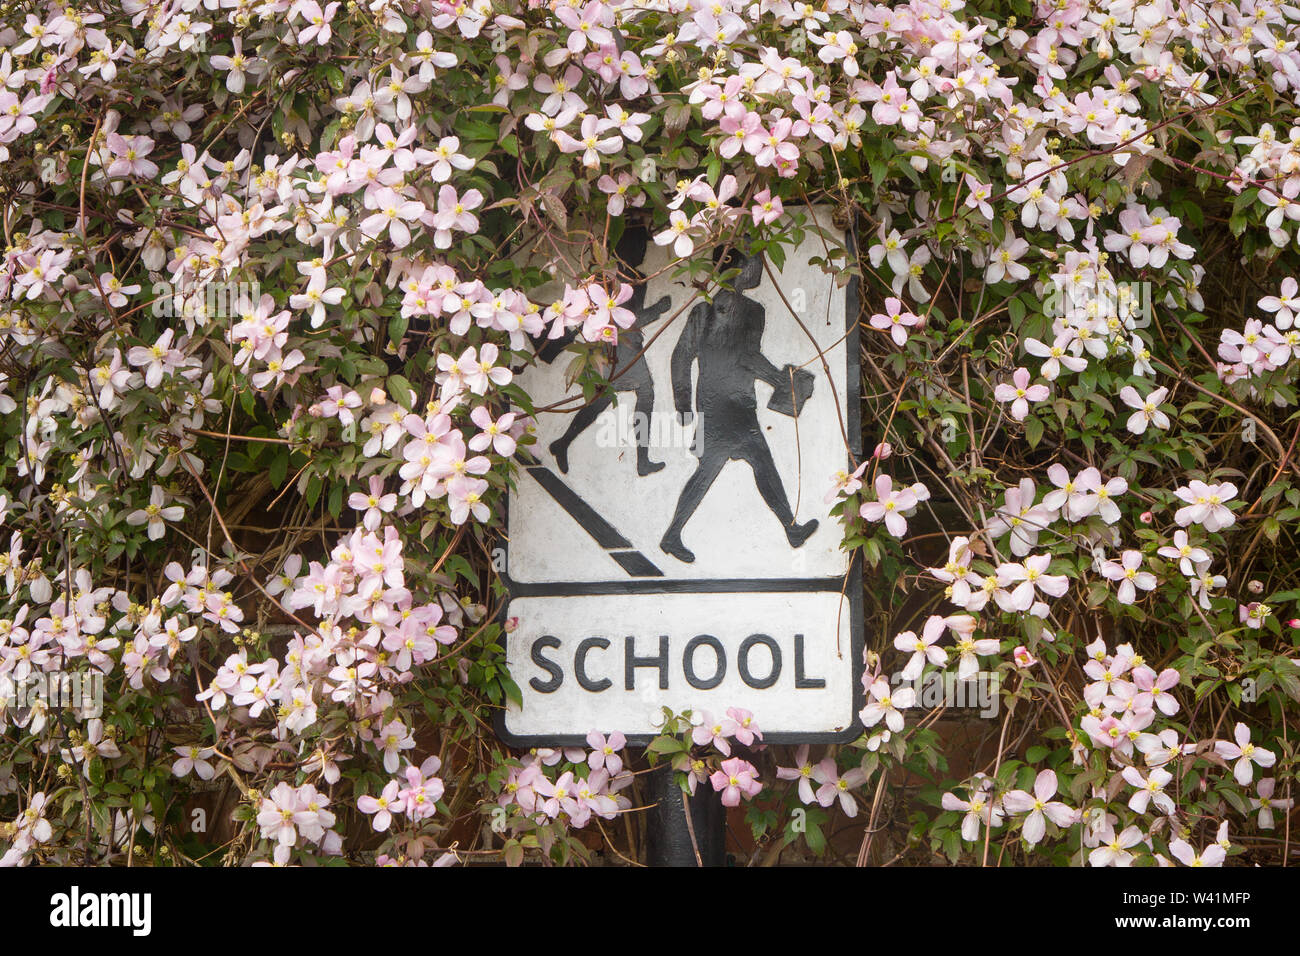 A traditional school sign surrounded and partially obscured by the flowers of clematis montana Stock Photo